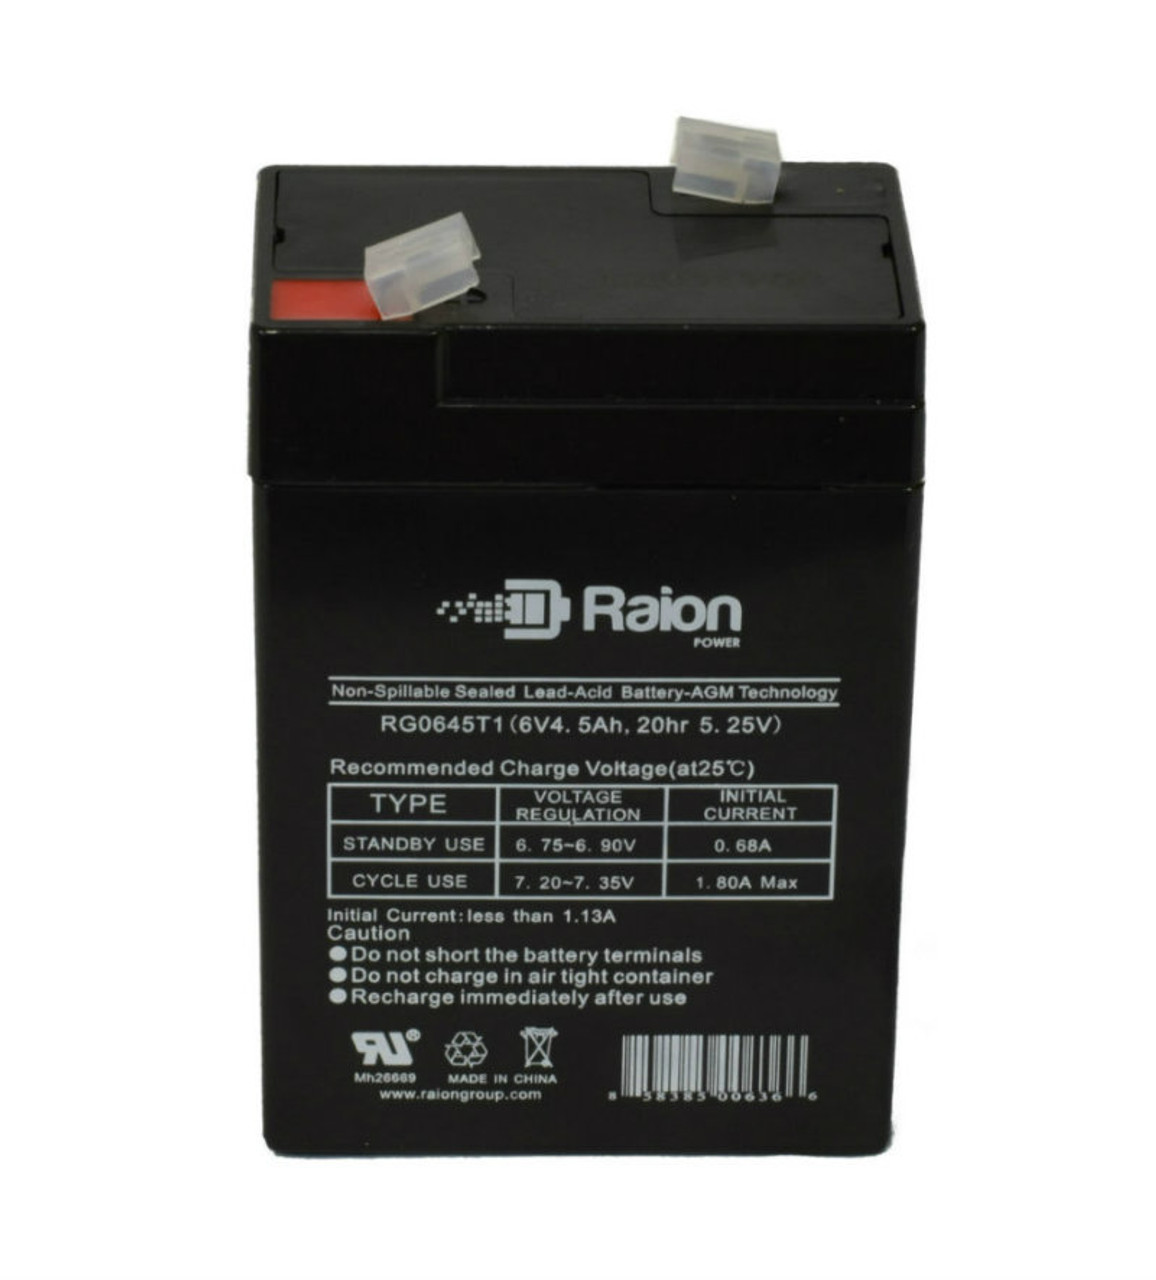 Raion Power RG0645T1 Replacement Battery Cartridge for TLV650